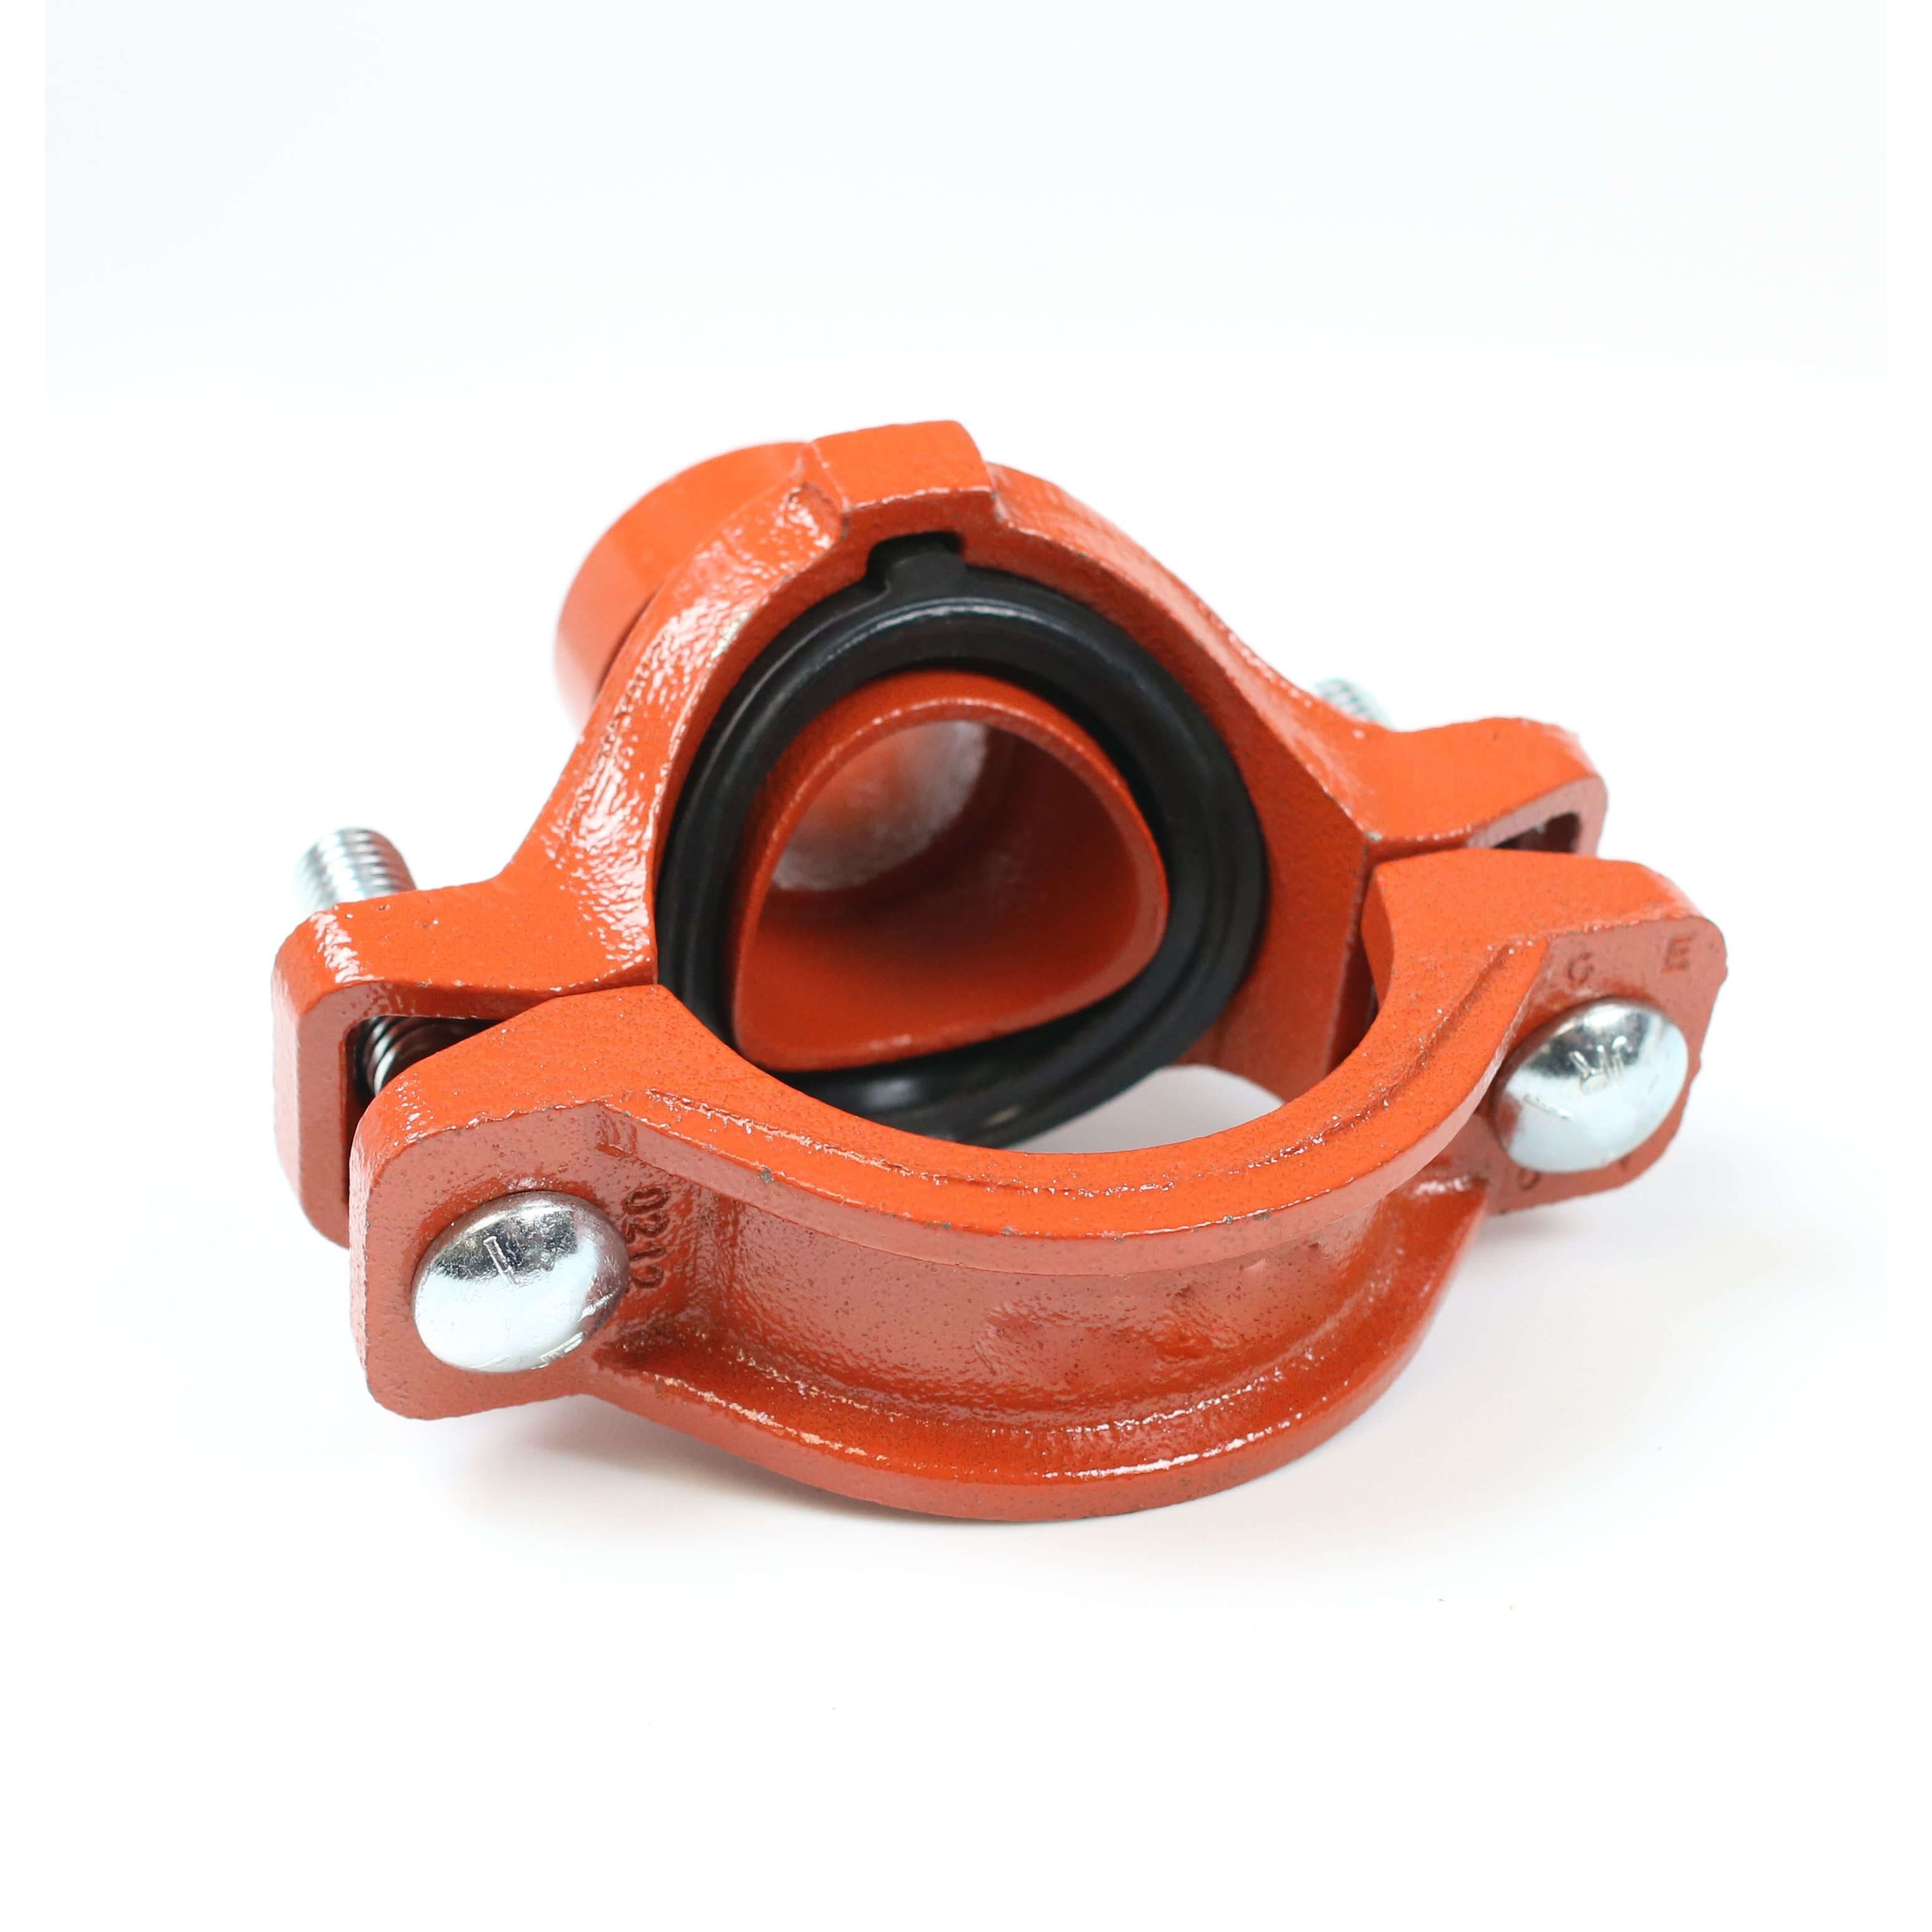 TONTR 3 in*2 in Mechanical tee with grooved for fire sprinkler systems